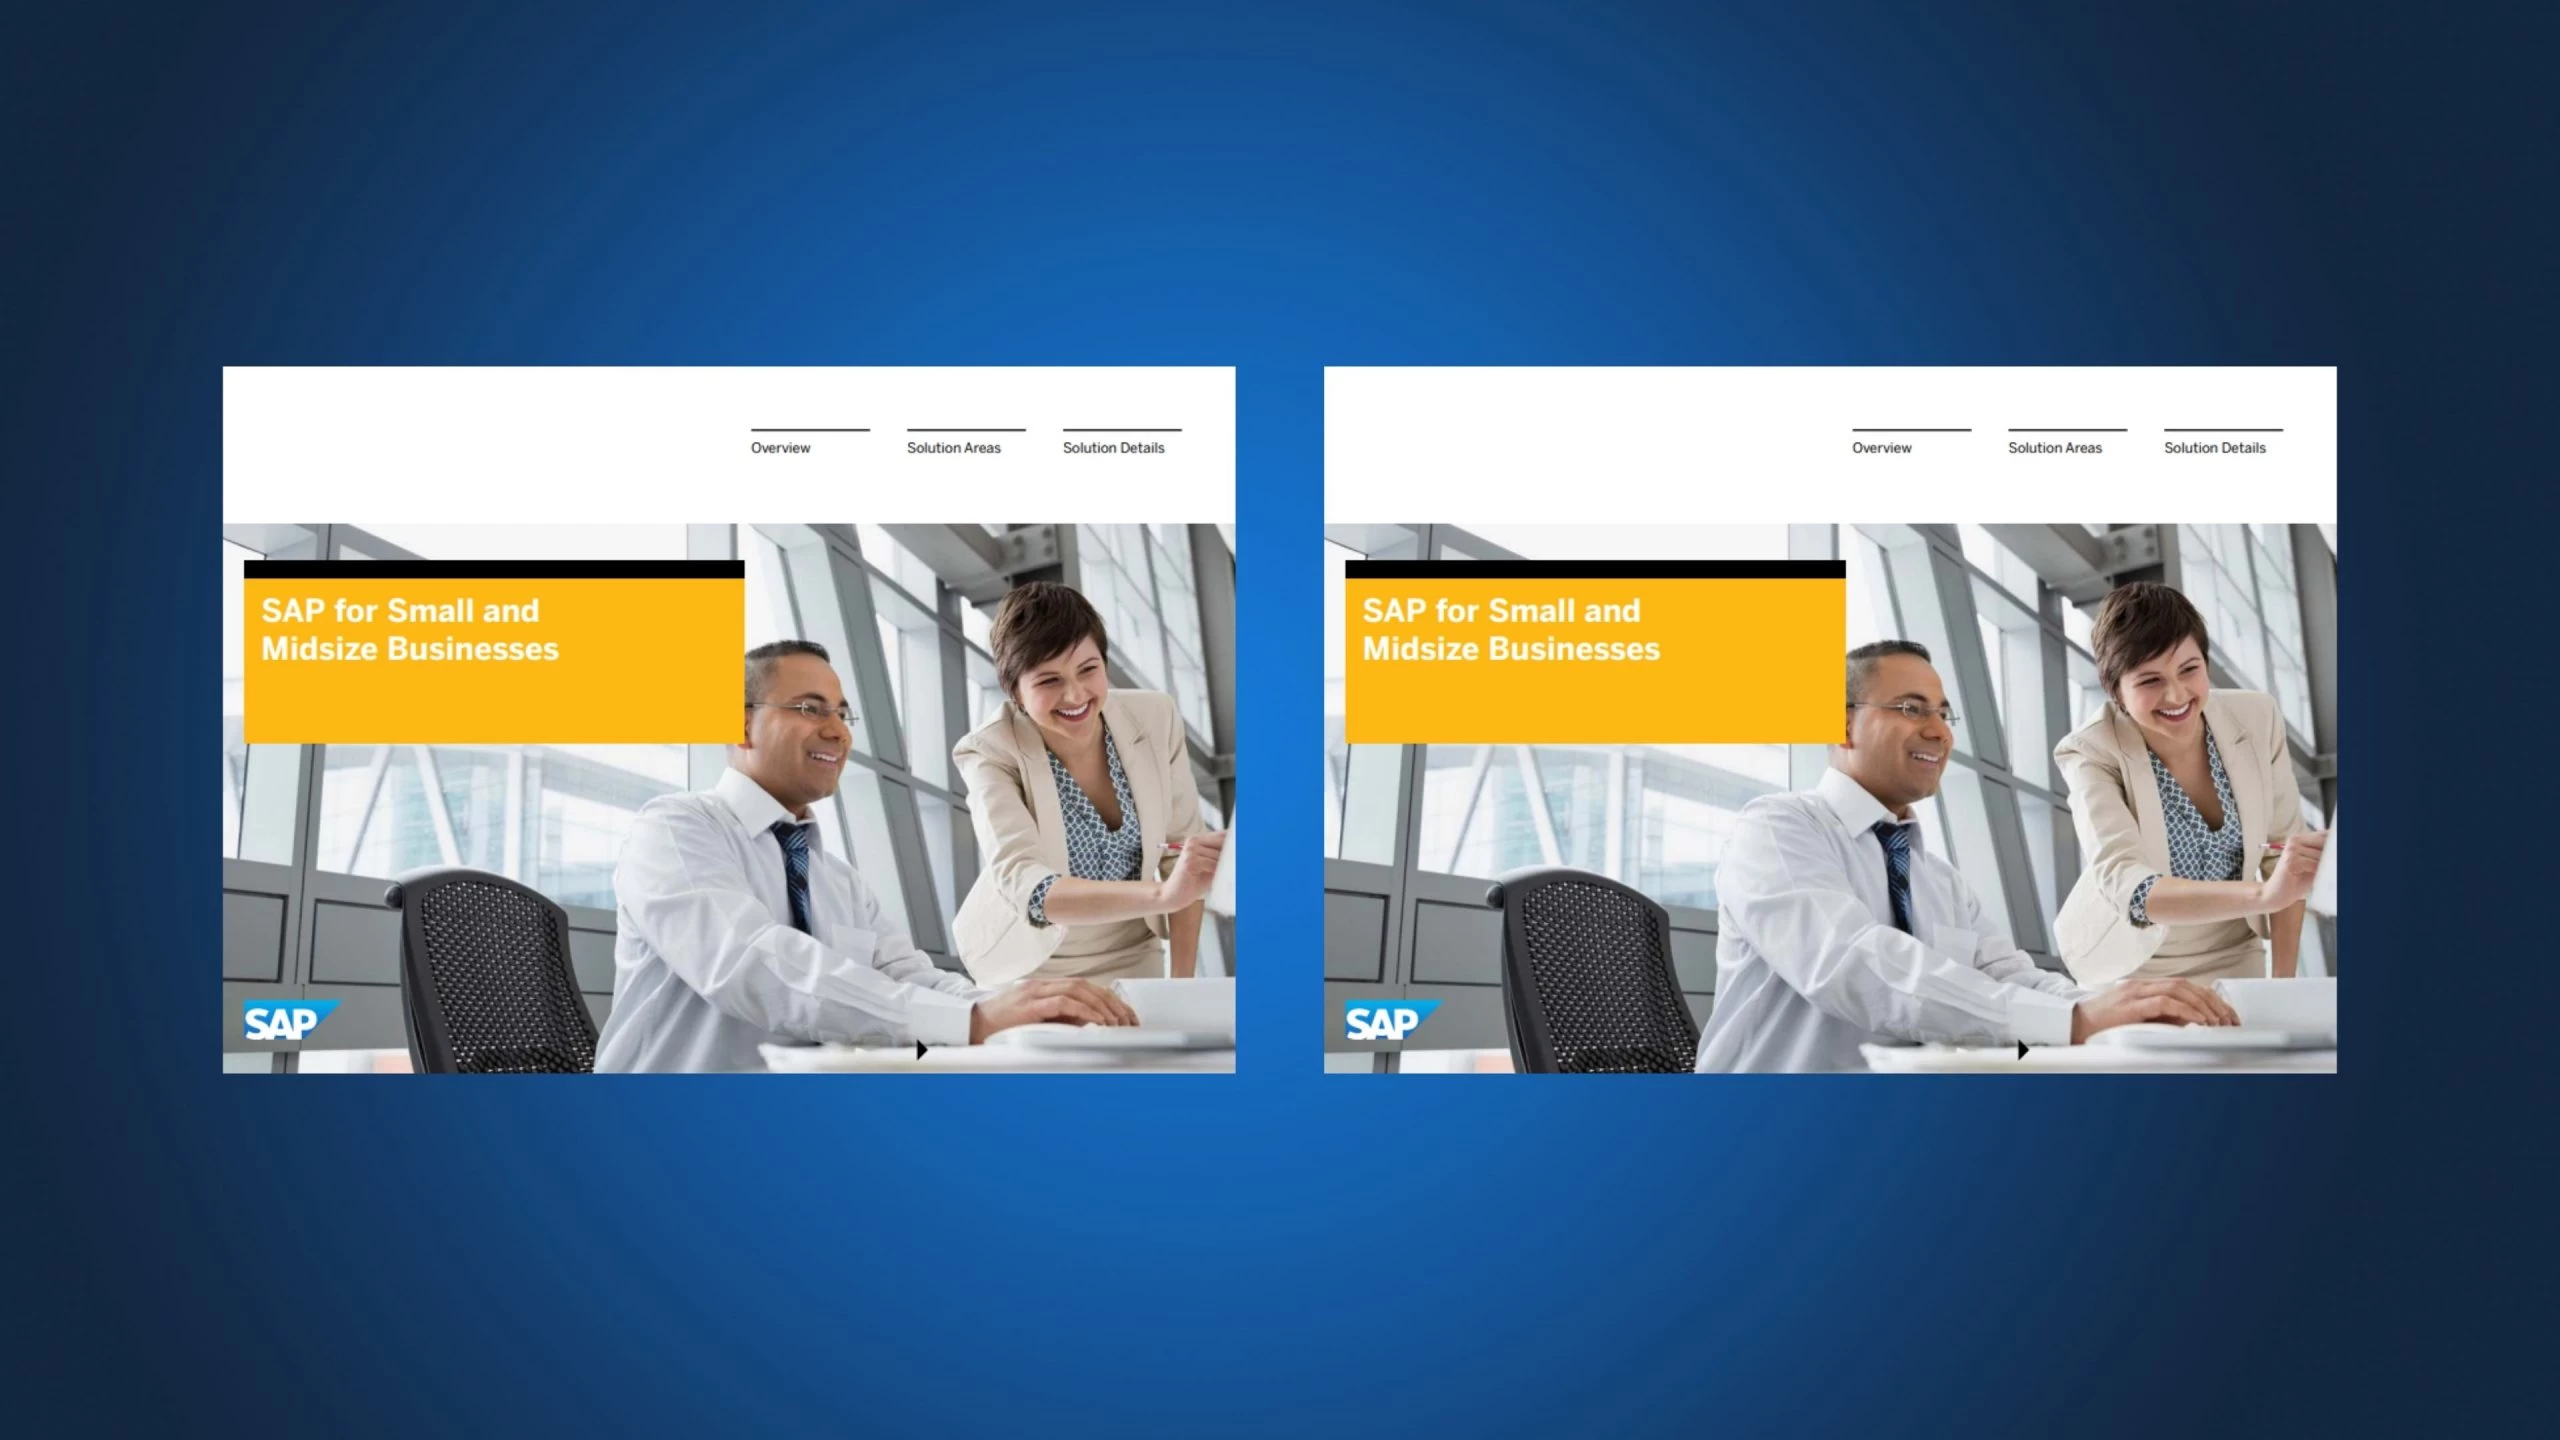 SAP Solutions for Small Businesses and Midsize Companies